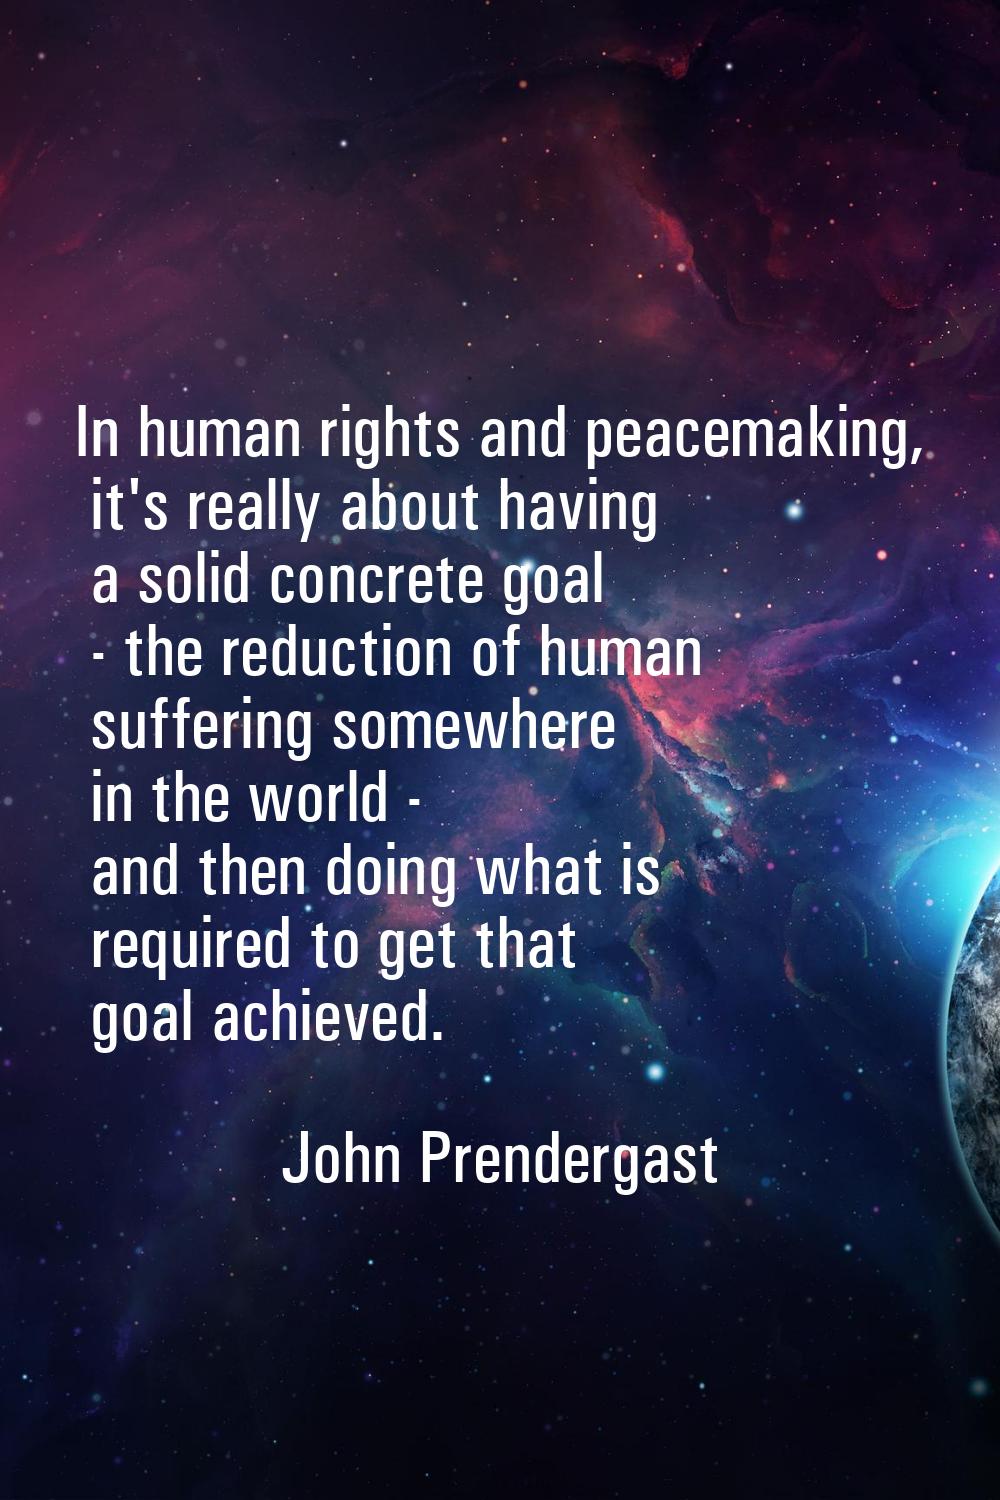 In human rights and peacemaking, it's really about having a solid concrete goal - the reduction of 